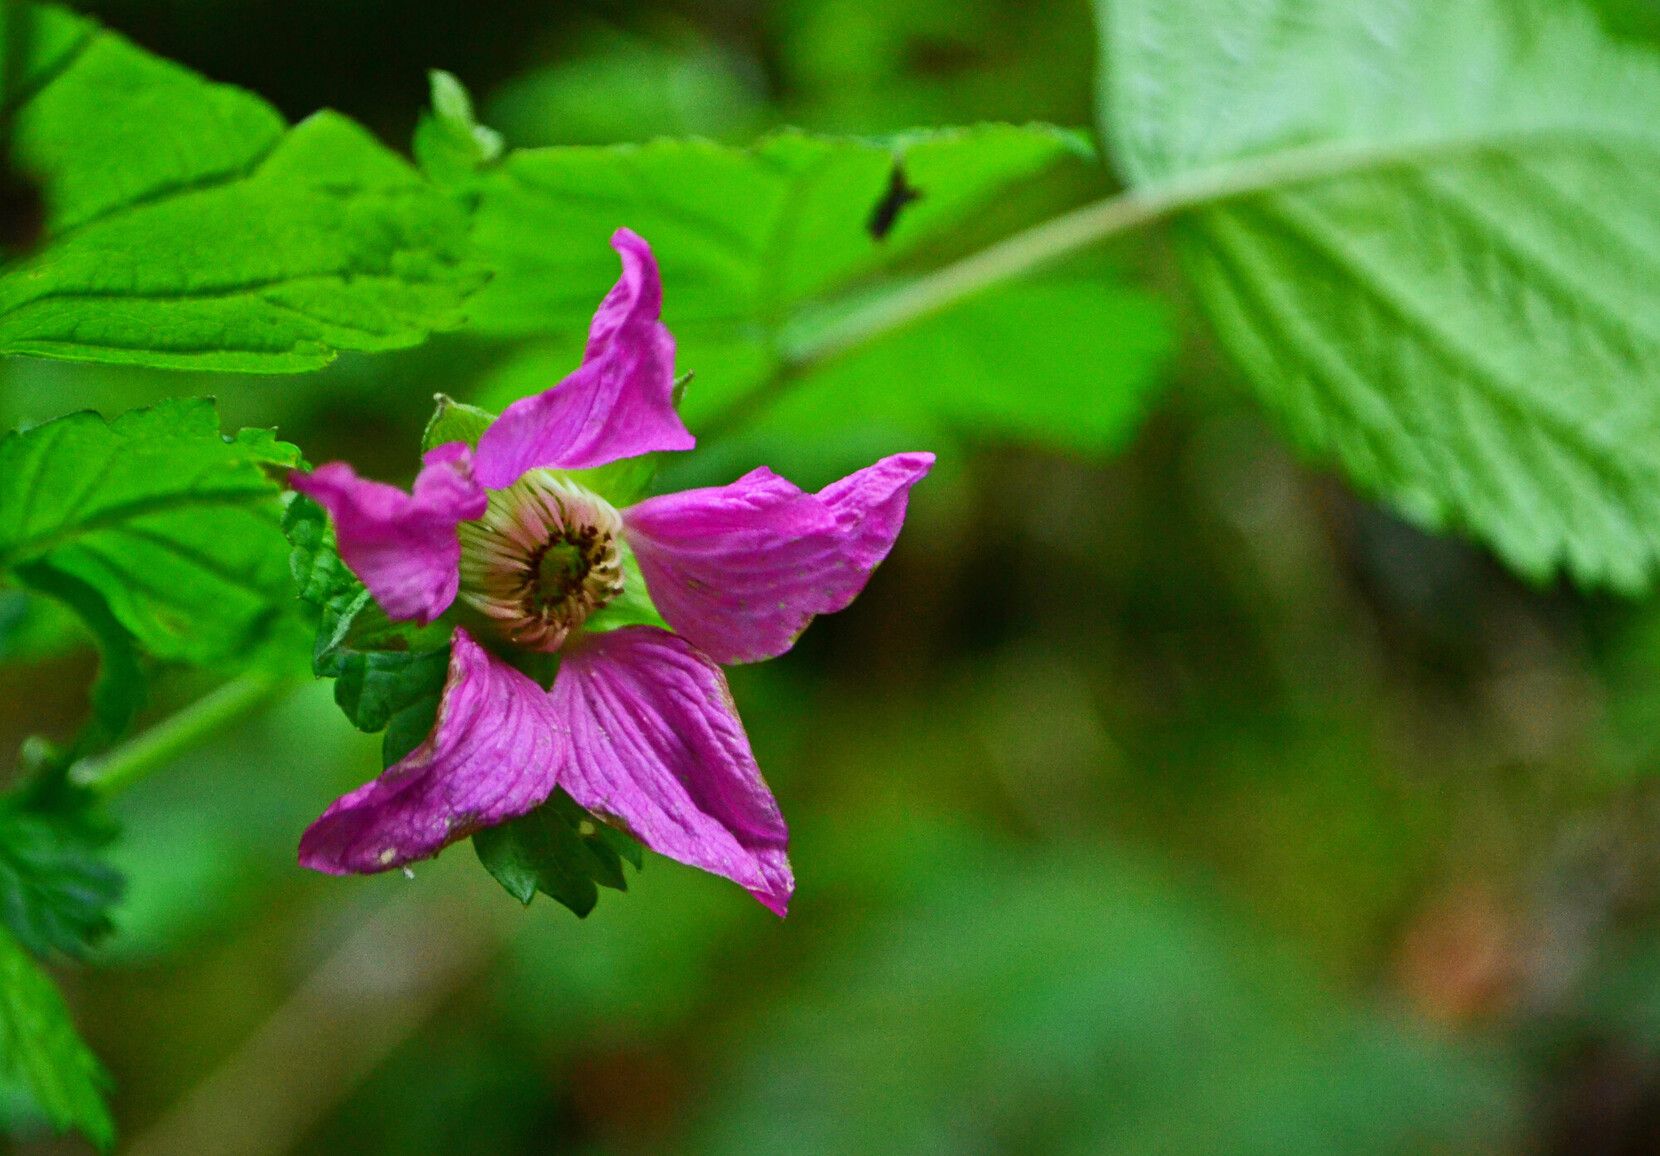 Flowering salmonberry bush, one of the many plant species in Silver Lake Park.